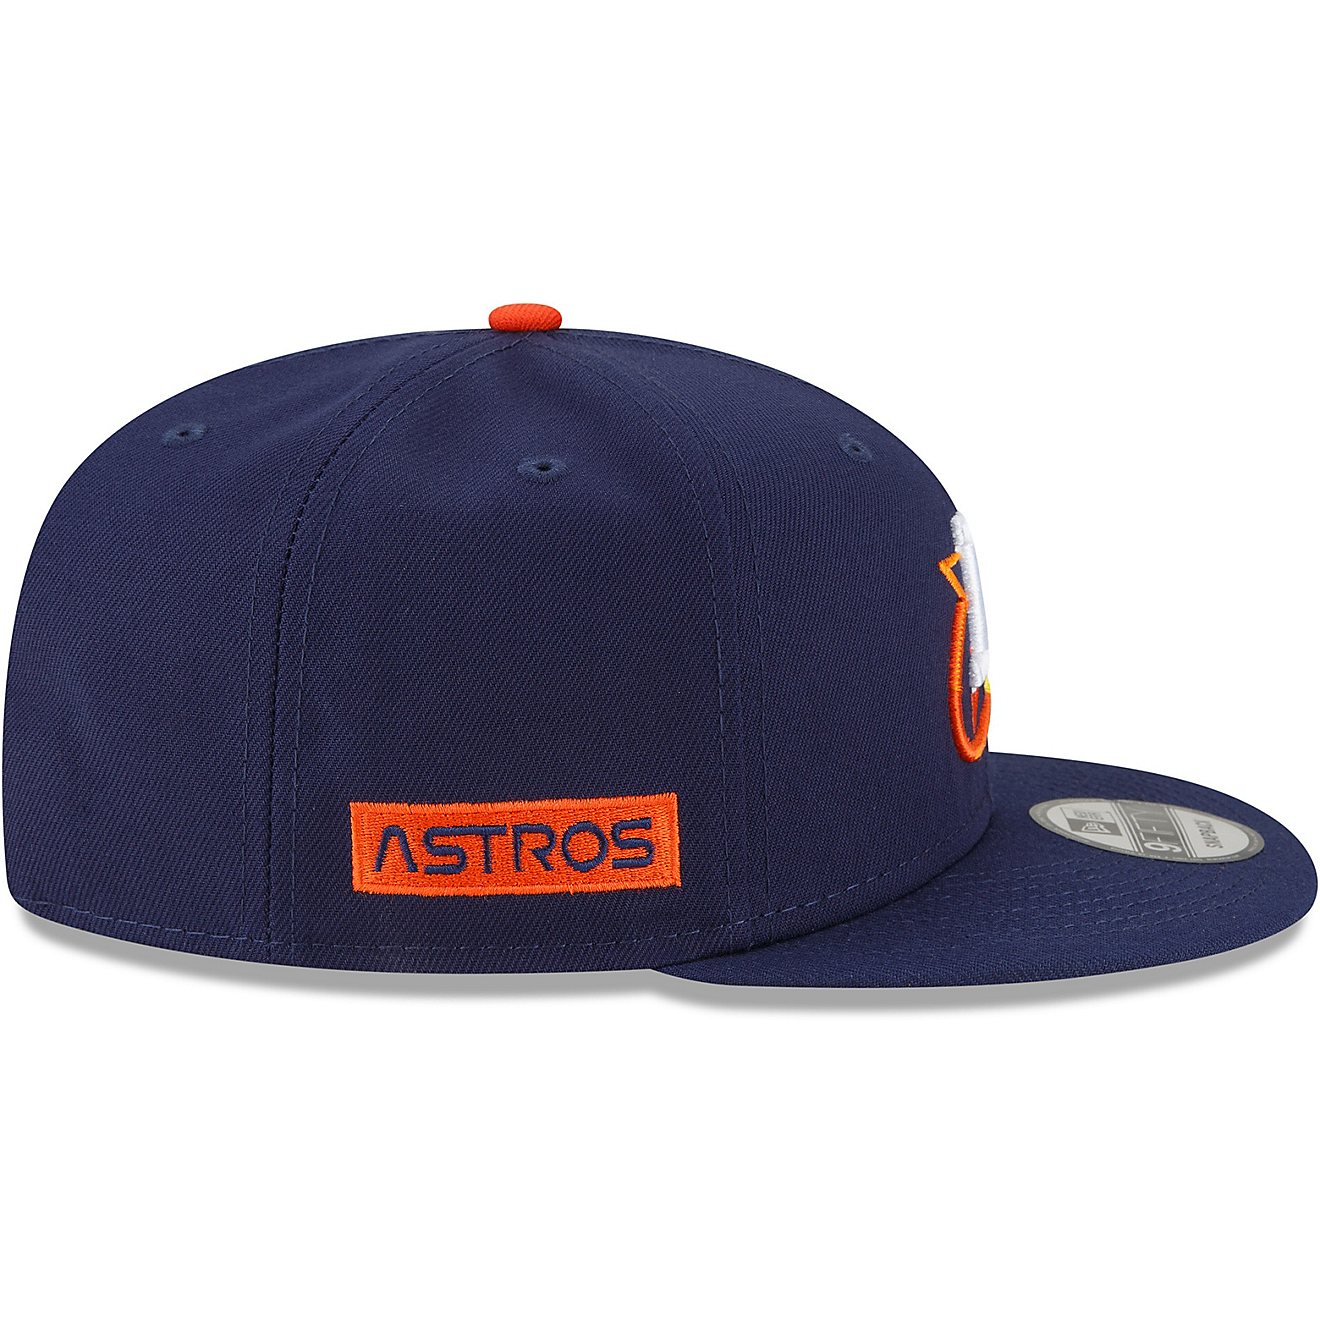 New Era Men's Houston Astros City Connect 9FIFTY Cap                                                                             - view number 6